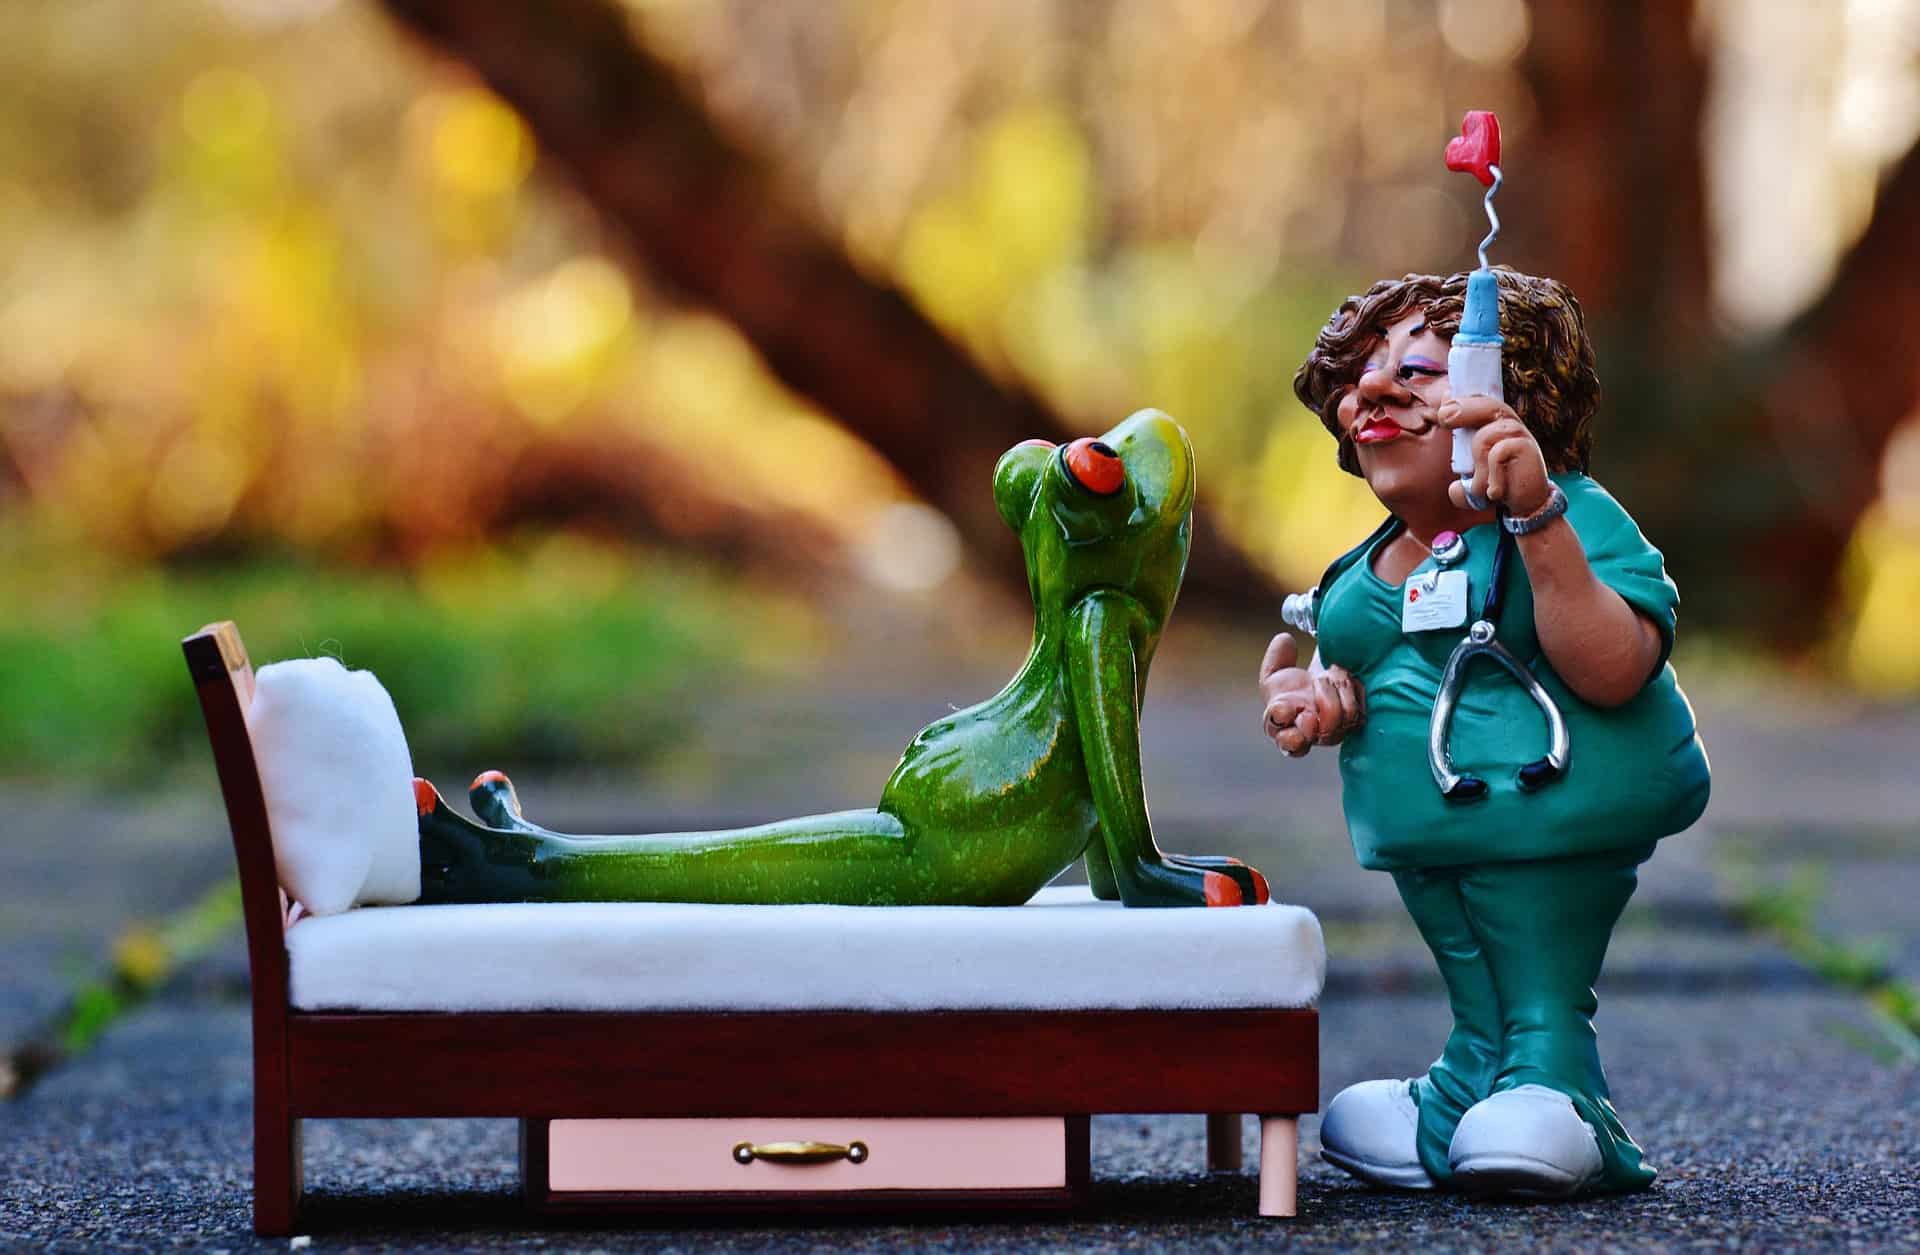 Nurse and frog small sculpture